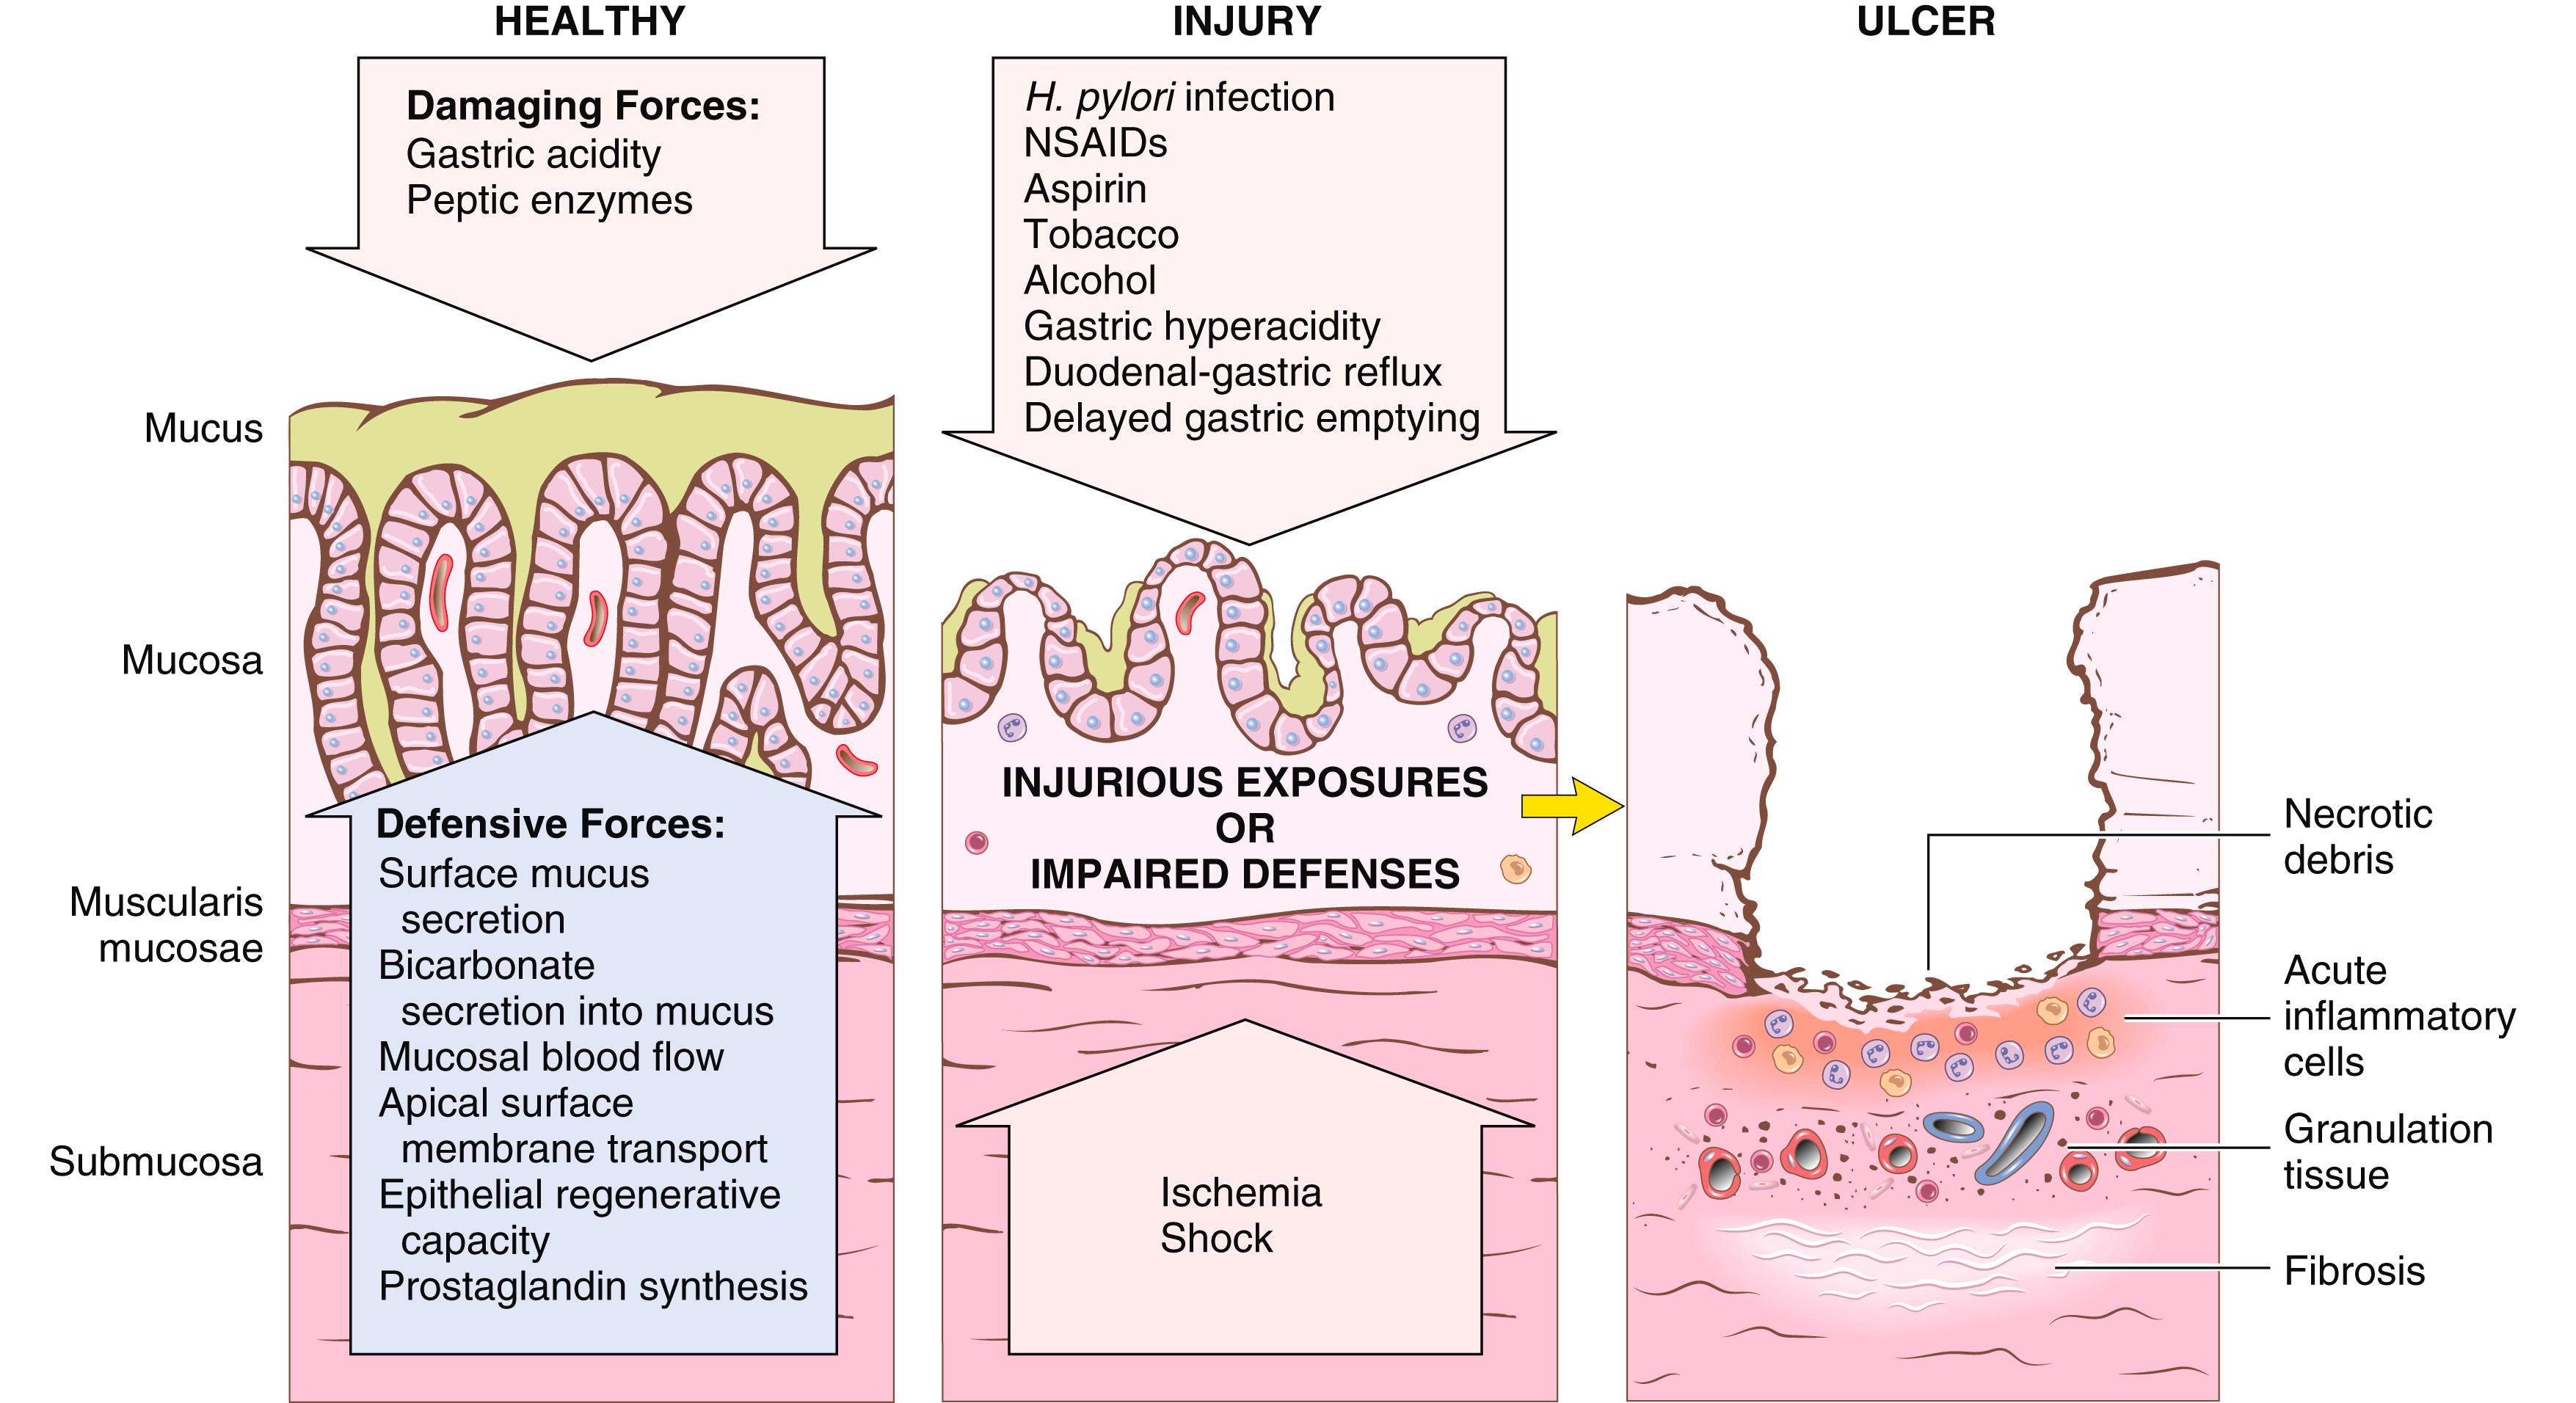 FIG. 13.13, Mechanisms of gastric injury and protection. This diagram illustrates the progression from mild forms of injury to ulceration that may occur with acute or chronic gastritis. Ulcers include layers of necrotic debris, inflammation, and granulation tissue; scarring, which develops over time, is present only in chronic lesions. NSAIDs, Nonsteroidal antiinflammatory drugs.